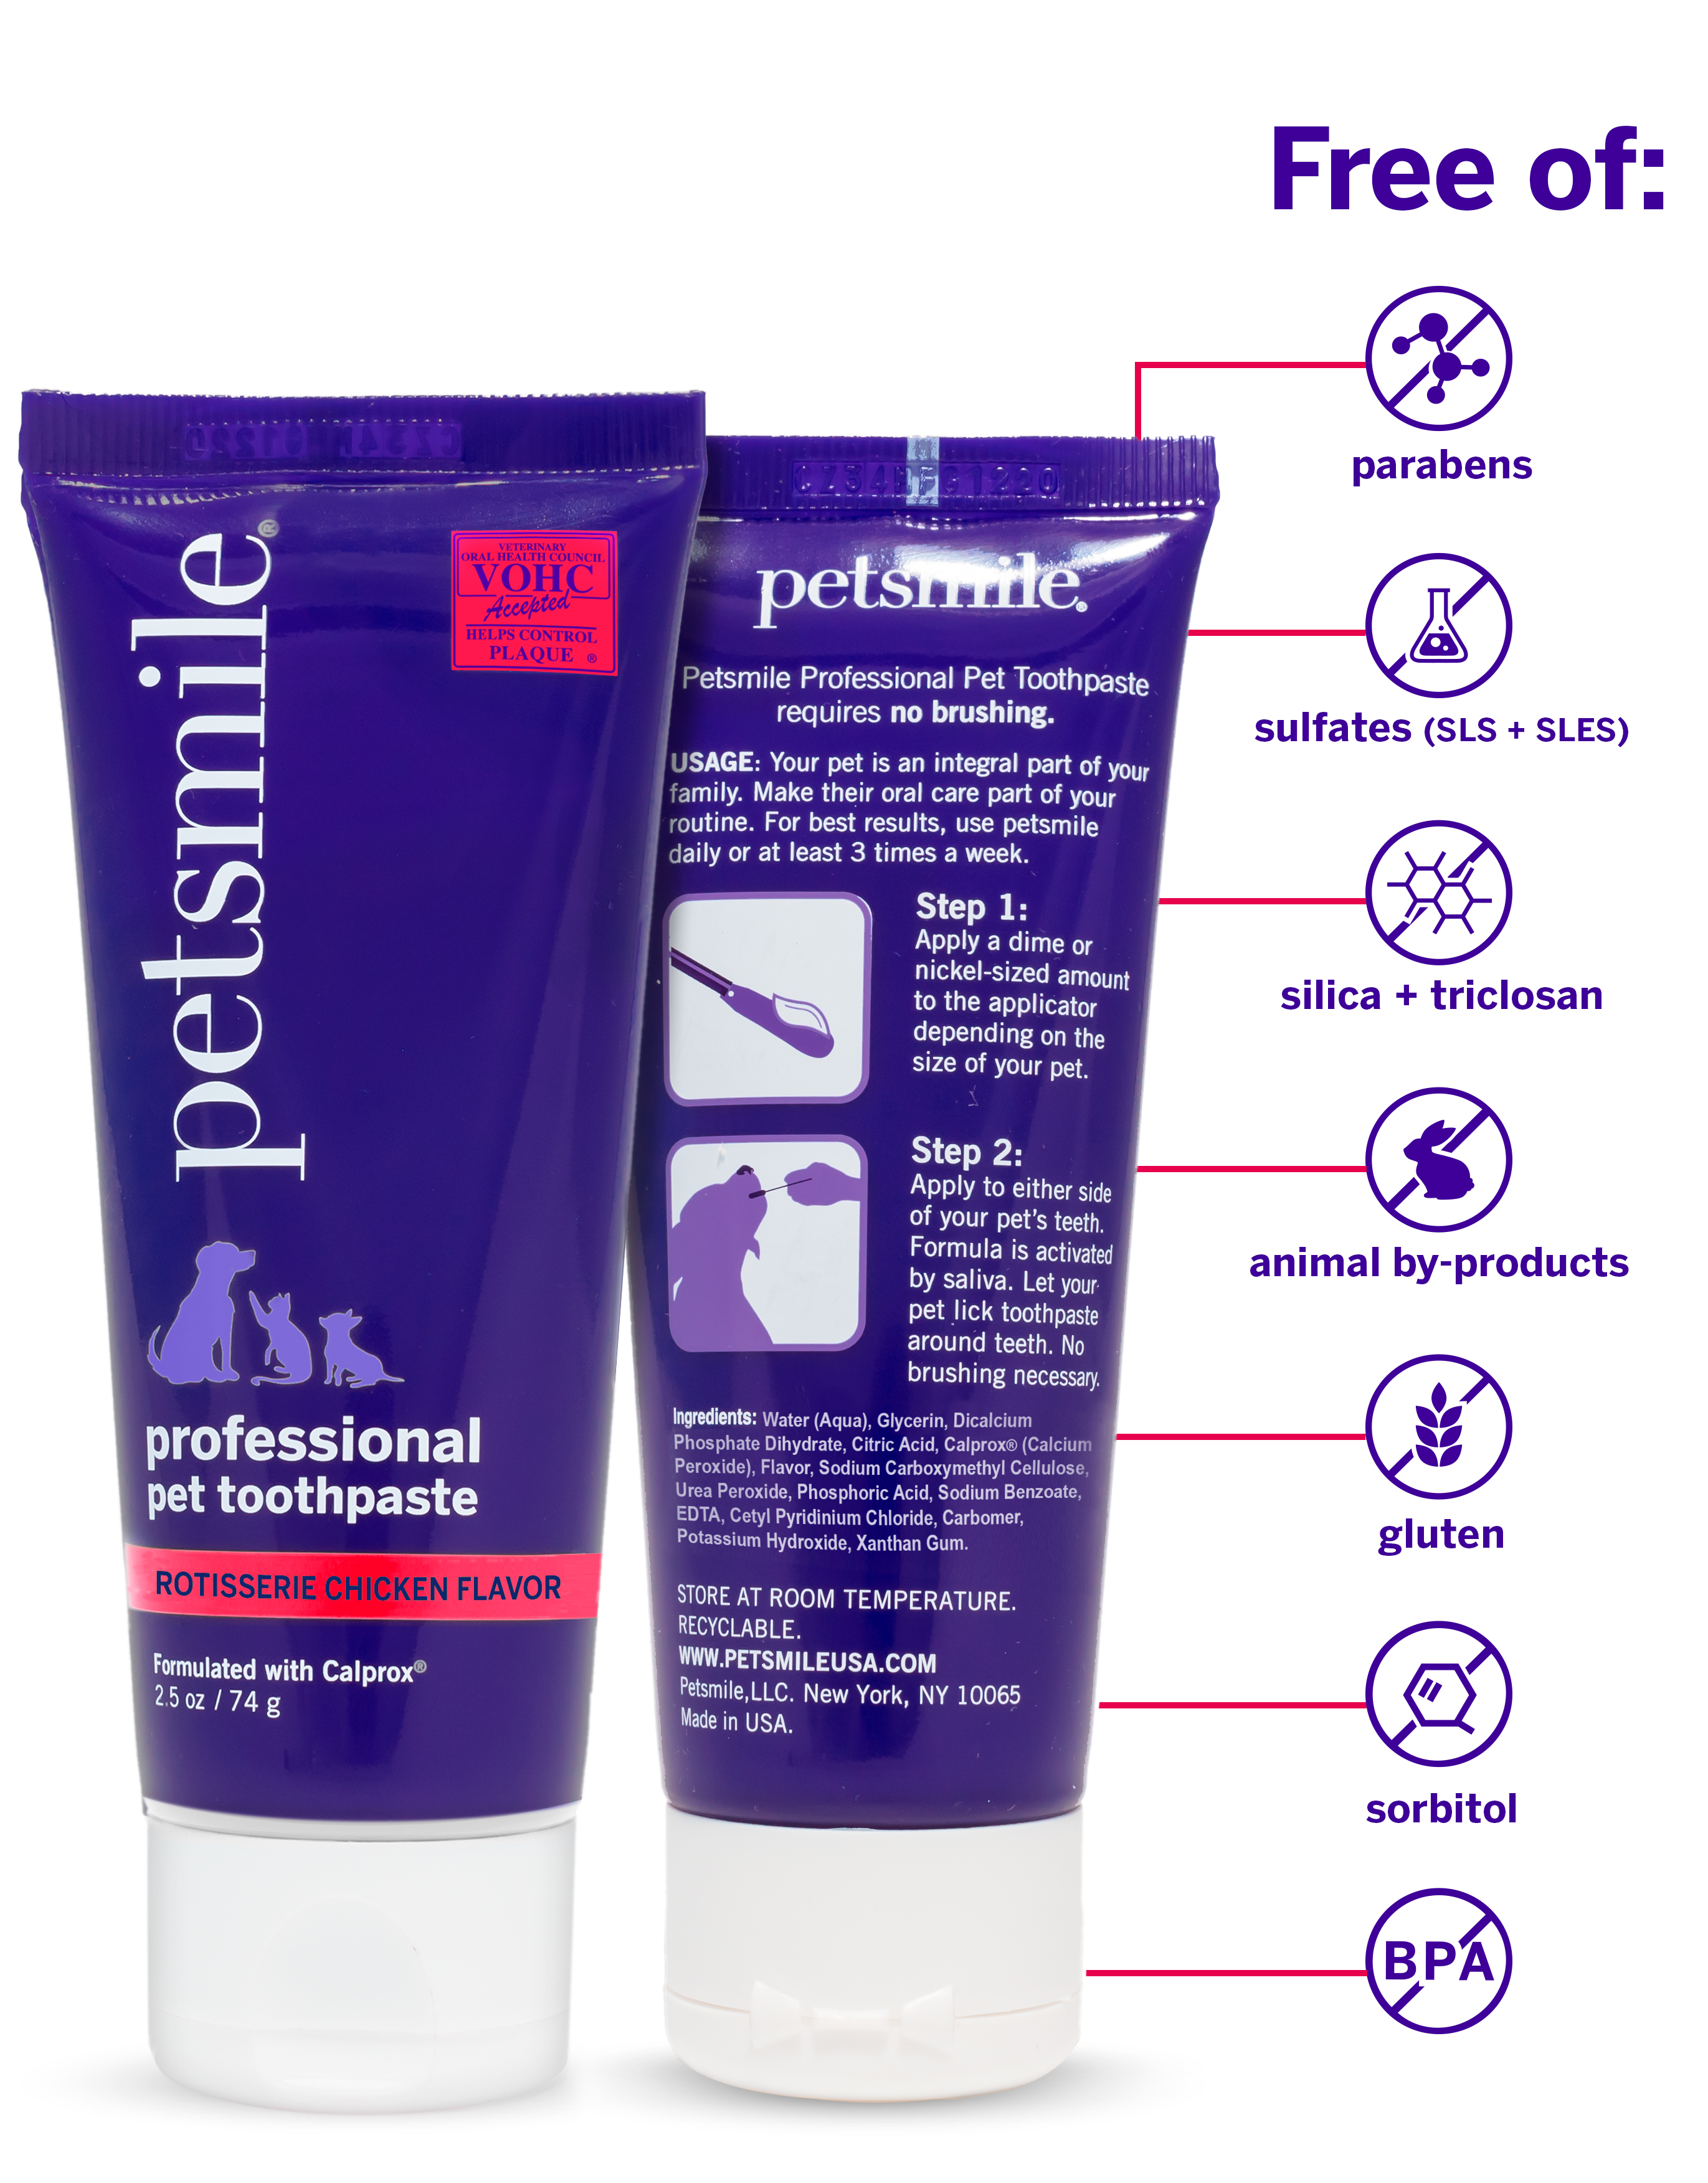 Improved dental health, fresher breath , Small tube of Roisserie Chicken flavor , Small purple tube of petsmile dog toothpaste , BPA-free, vegan, VOHC certified , 2.5 OZ of Roisserie Chicken flavor dog toothpaste